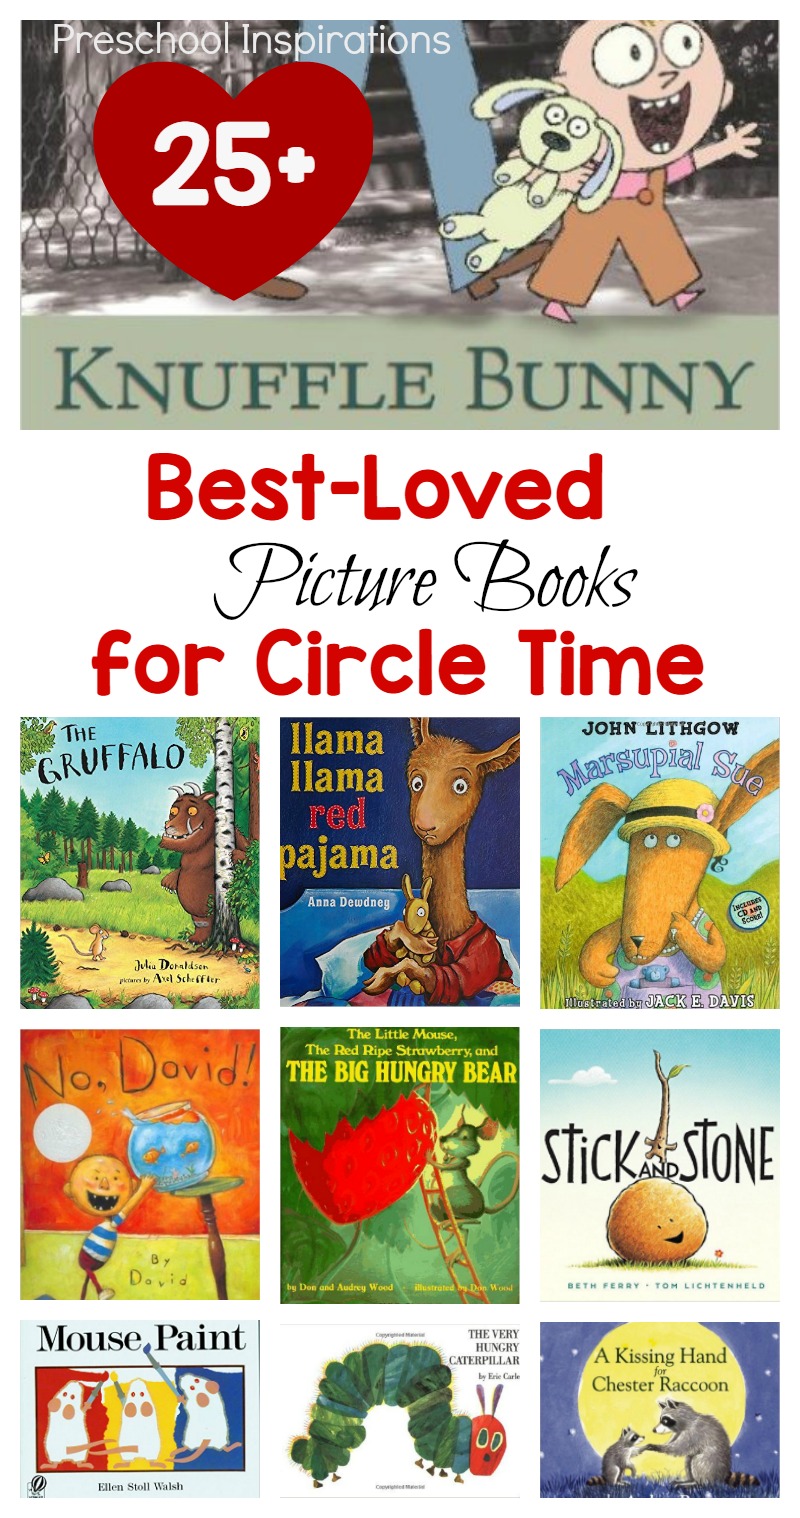 Need the perfect book for a read aloud? Here are 25+ of the most popular children's books that are best loved for circle time. Kindergarteners, preschoolers, toddlers, and children of all ages love hearing these best loved picture books. #prek #preschool #kindergarten #booksforkids #readaloud #circletime #circletimebooks #picturebooks 